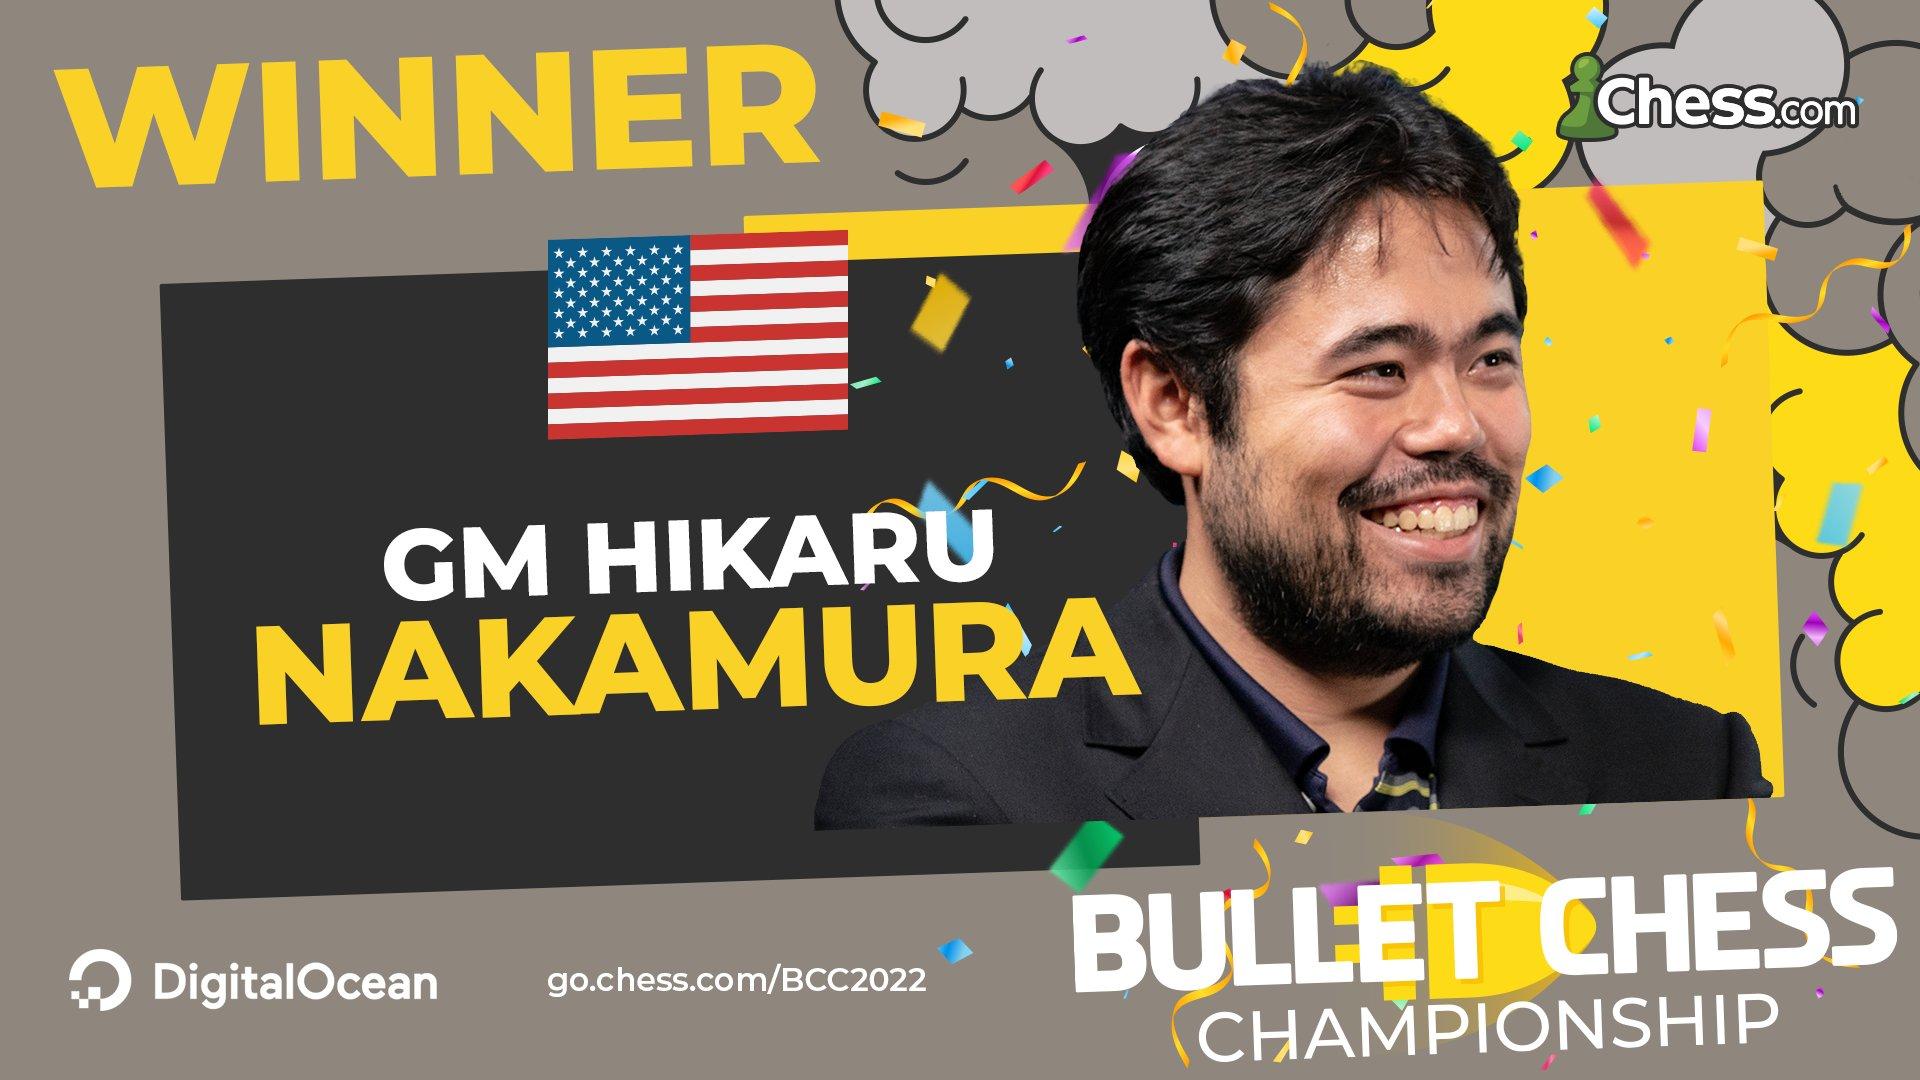 Chess.com on X: ♔ @GMHikaru WINS his quarterfinal match and is one step  closer to defending his Speed Chess Championship crown! 👏 Final score:  Nakamura: 18.5 Giri: 10.5 Replay the games